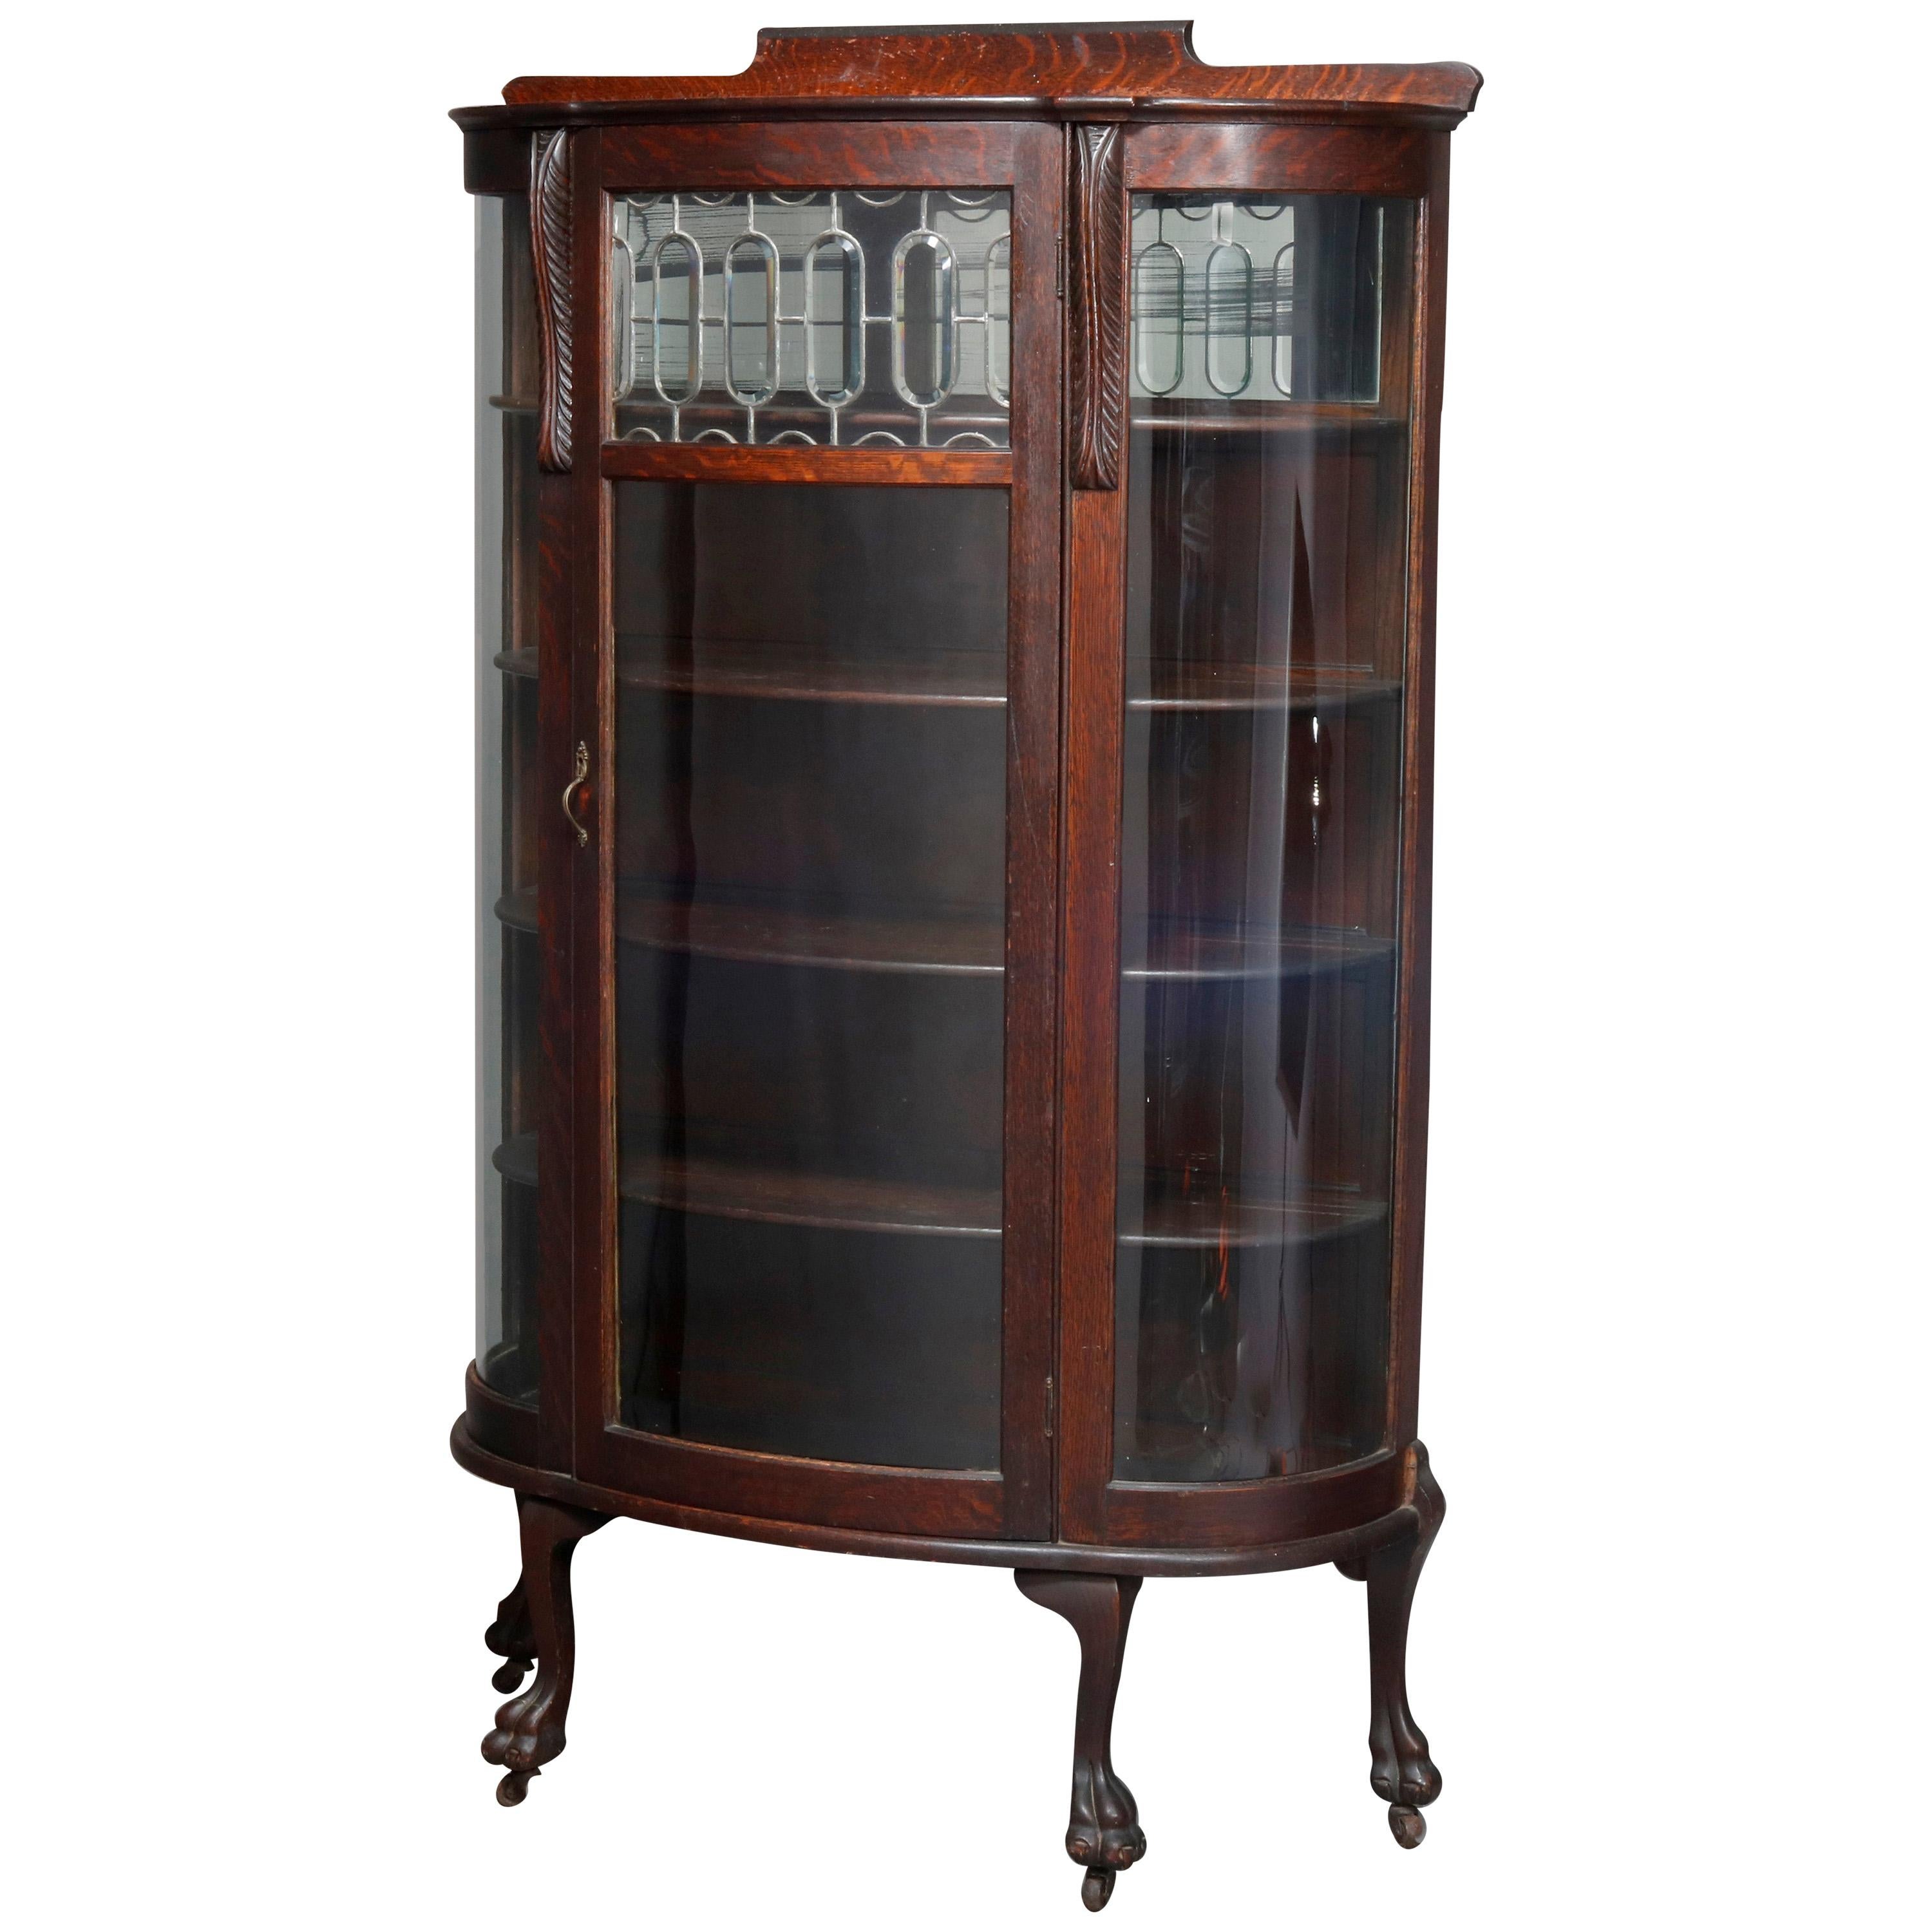 Antique Victorian Oak and Leaded Glass China Cabinet with Paw Feet, circa 1890